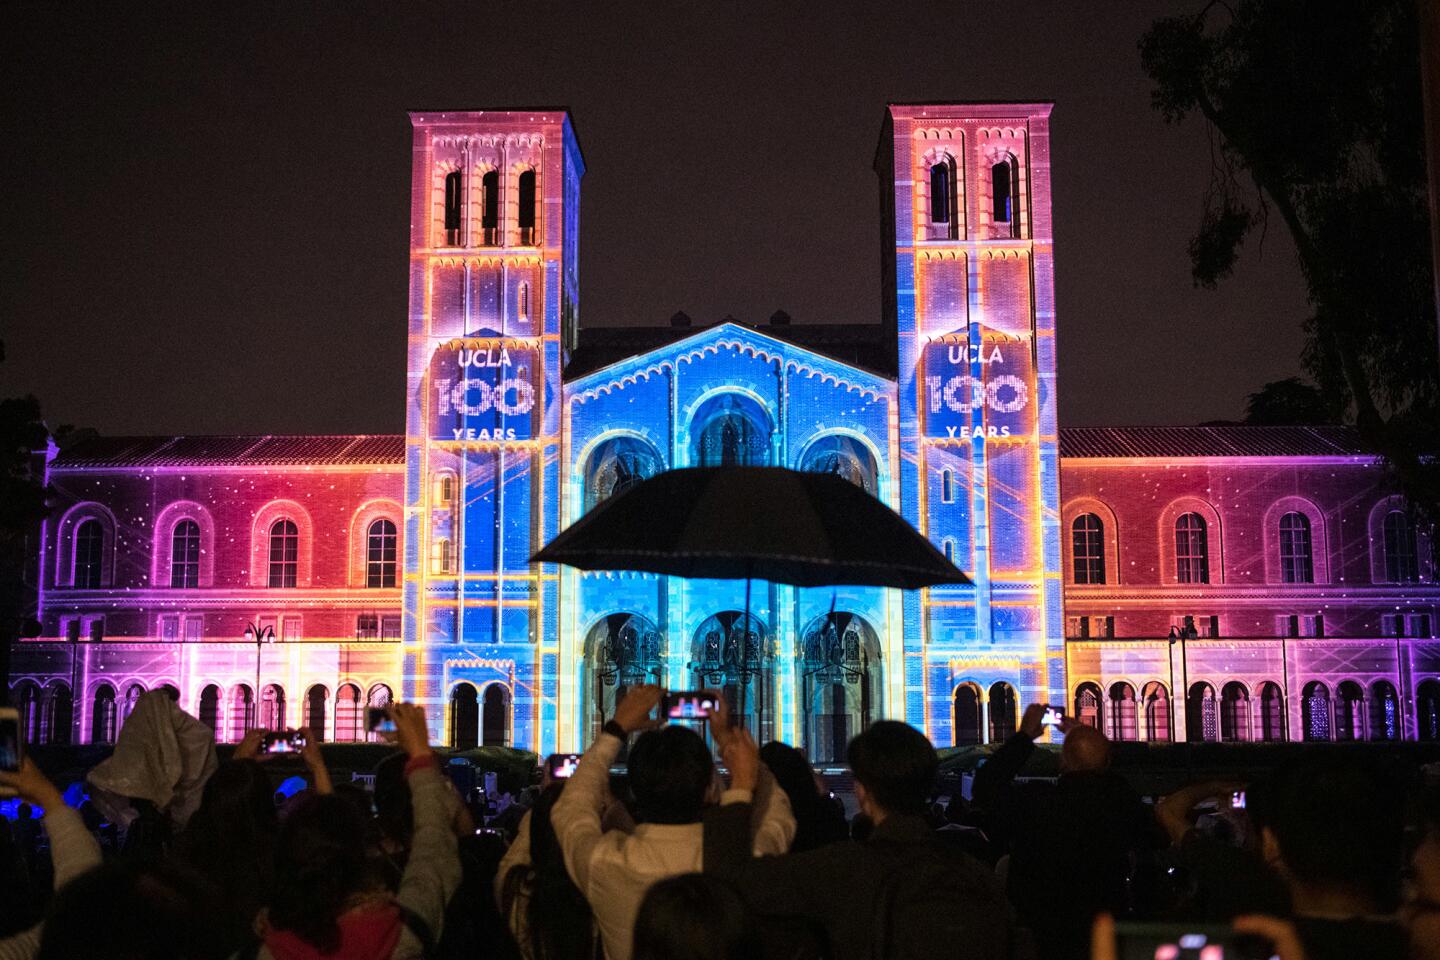 A light show is projected on UCLA's Royce Hall during a nighttime kickoff May 18 for the university's 100-year celebration.